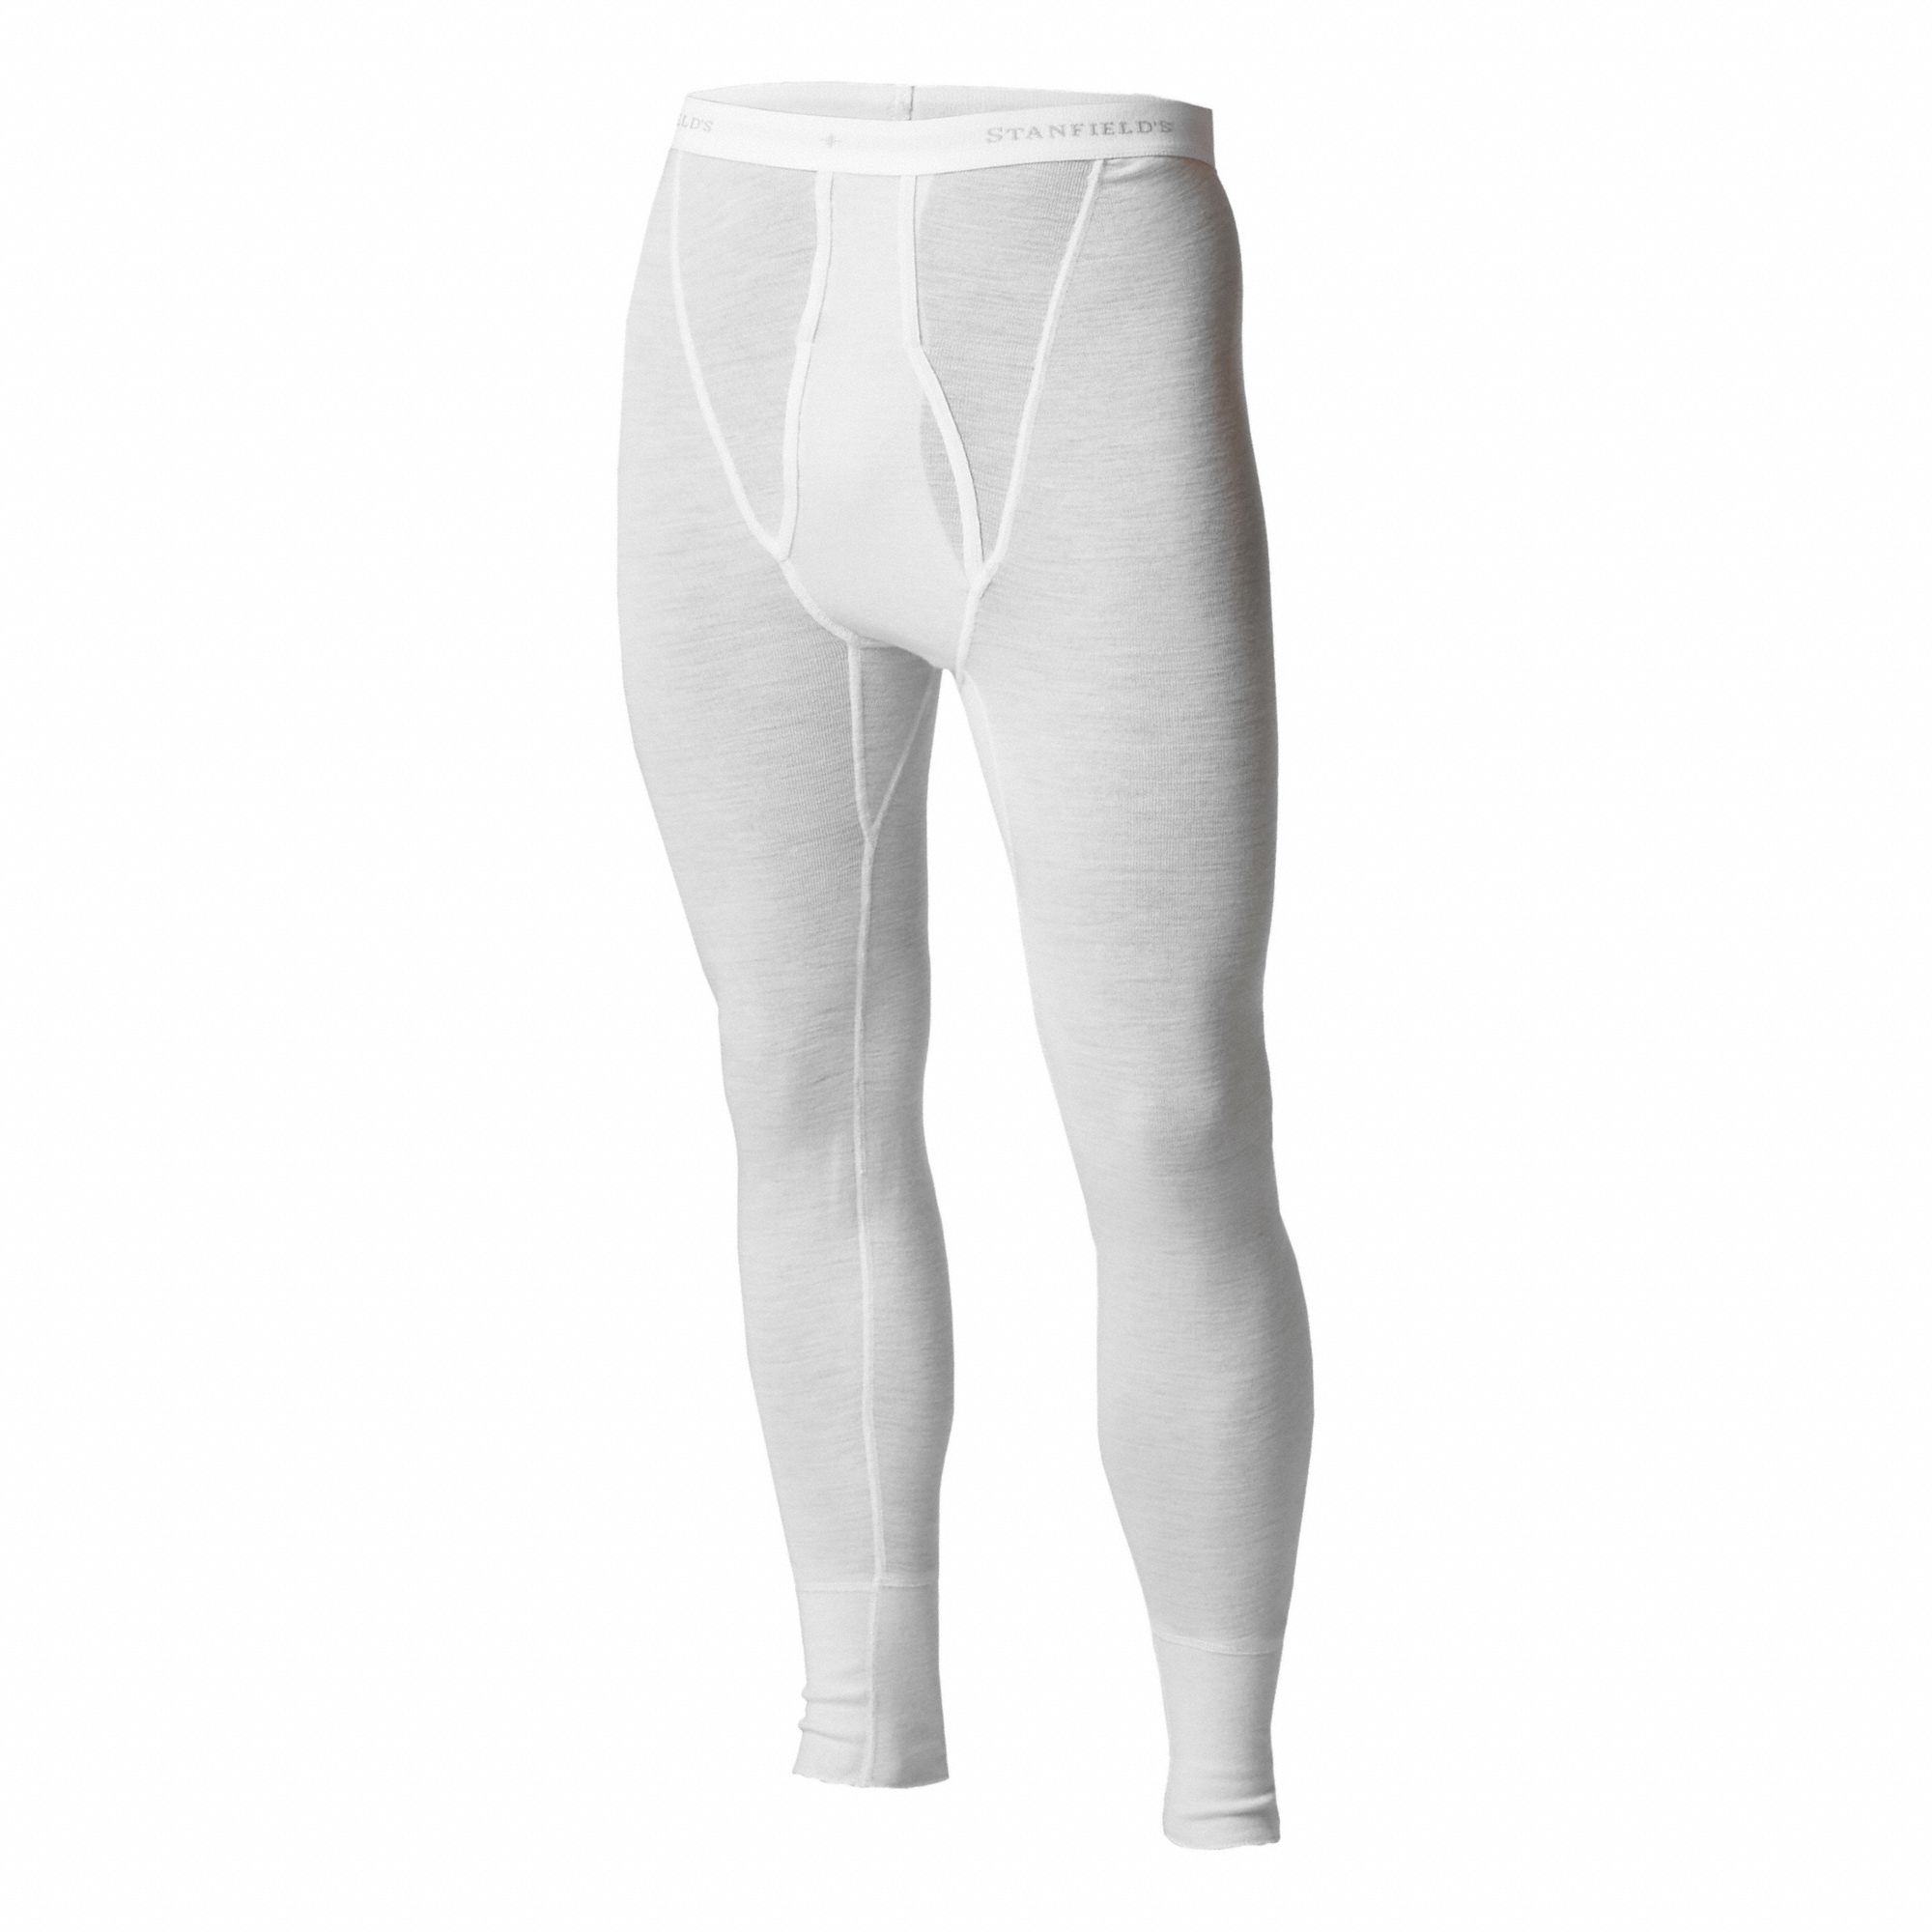 STANFIELD'S LIMITED MEN'S NATURAL LONG JOHNS, SIZE 2XL, SUPERWASH WOOL, 214  G/SQ M - Thermal Underwear - NVT4312-101-2XL